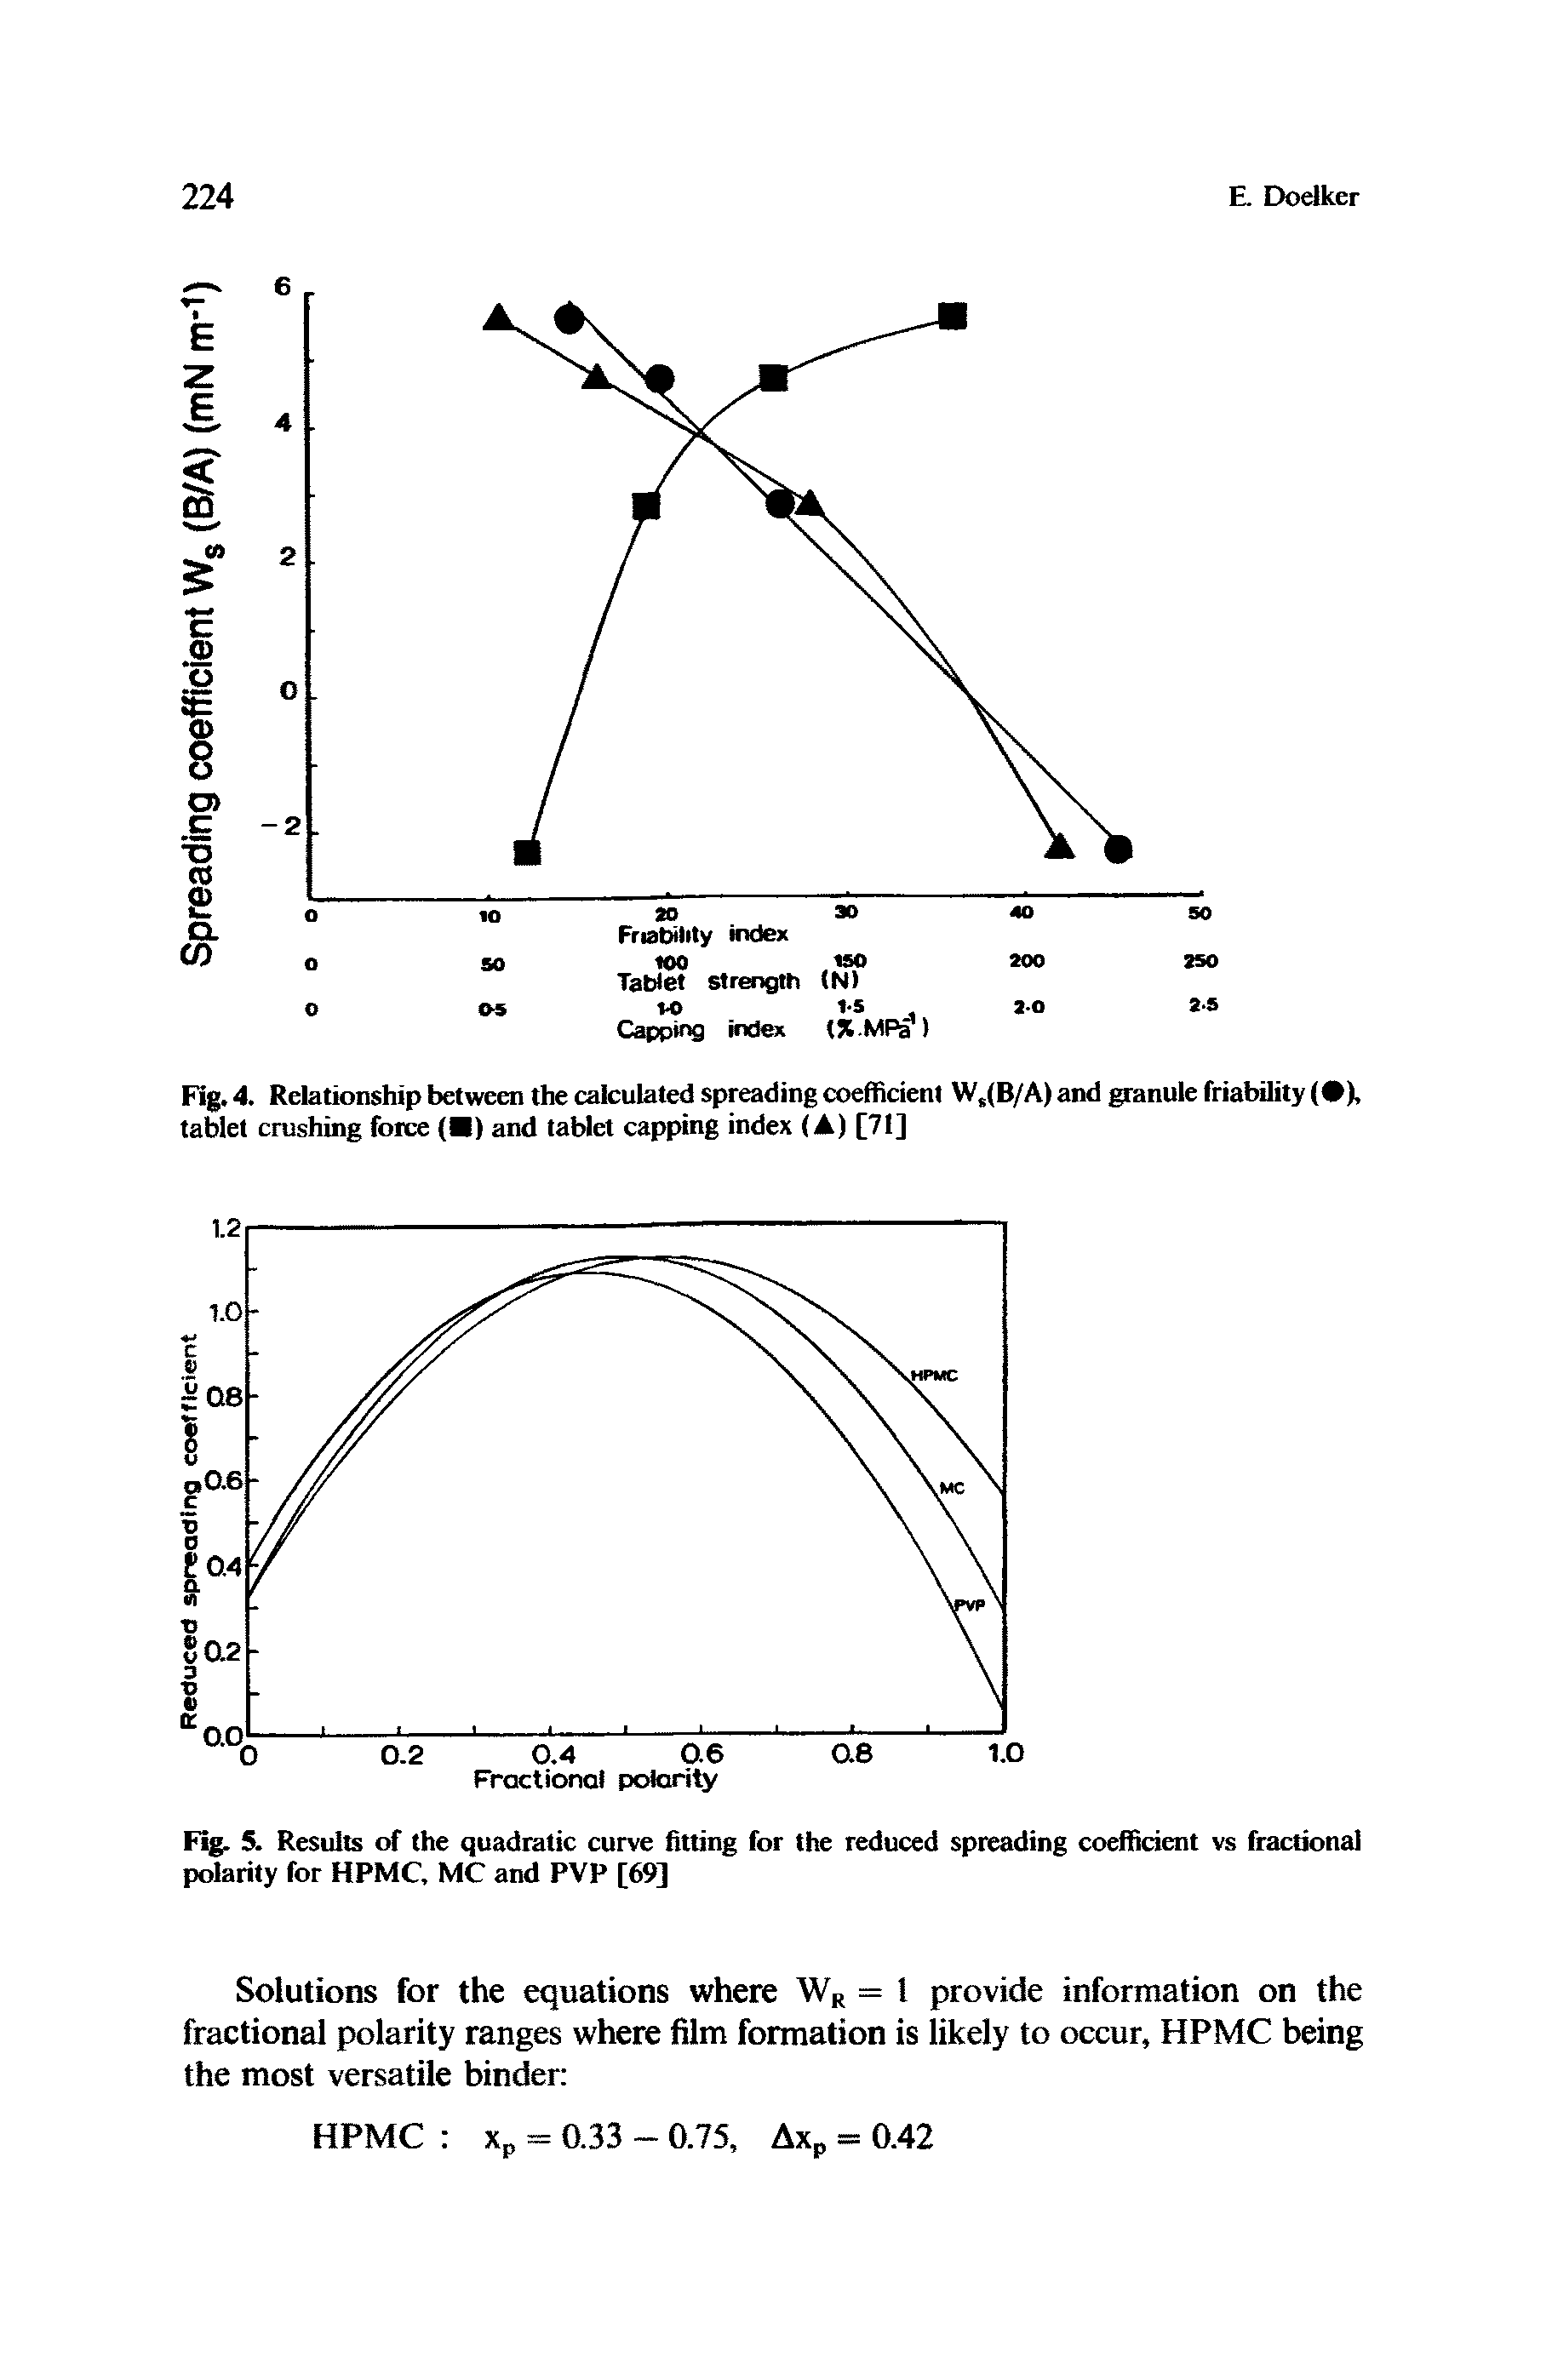 Fig. 4. Relationship between the calculated spreading coefficient WS(B/A) and granule friability ( ), tablet crushing force ( ) and tablet capping index (A) [71]...